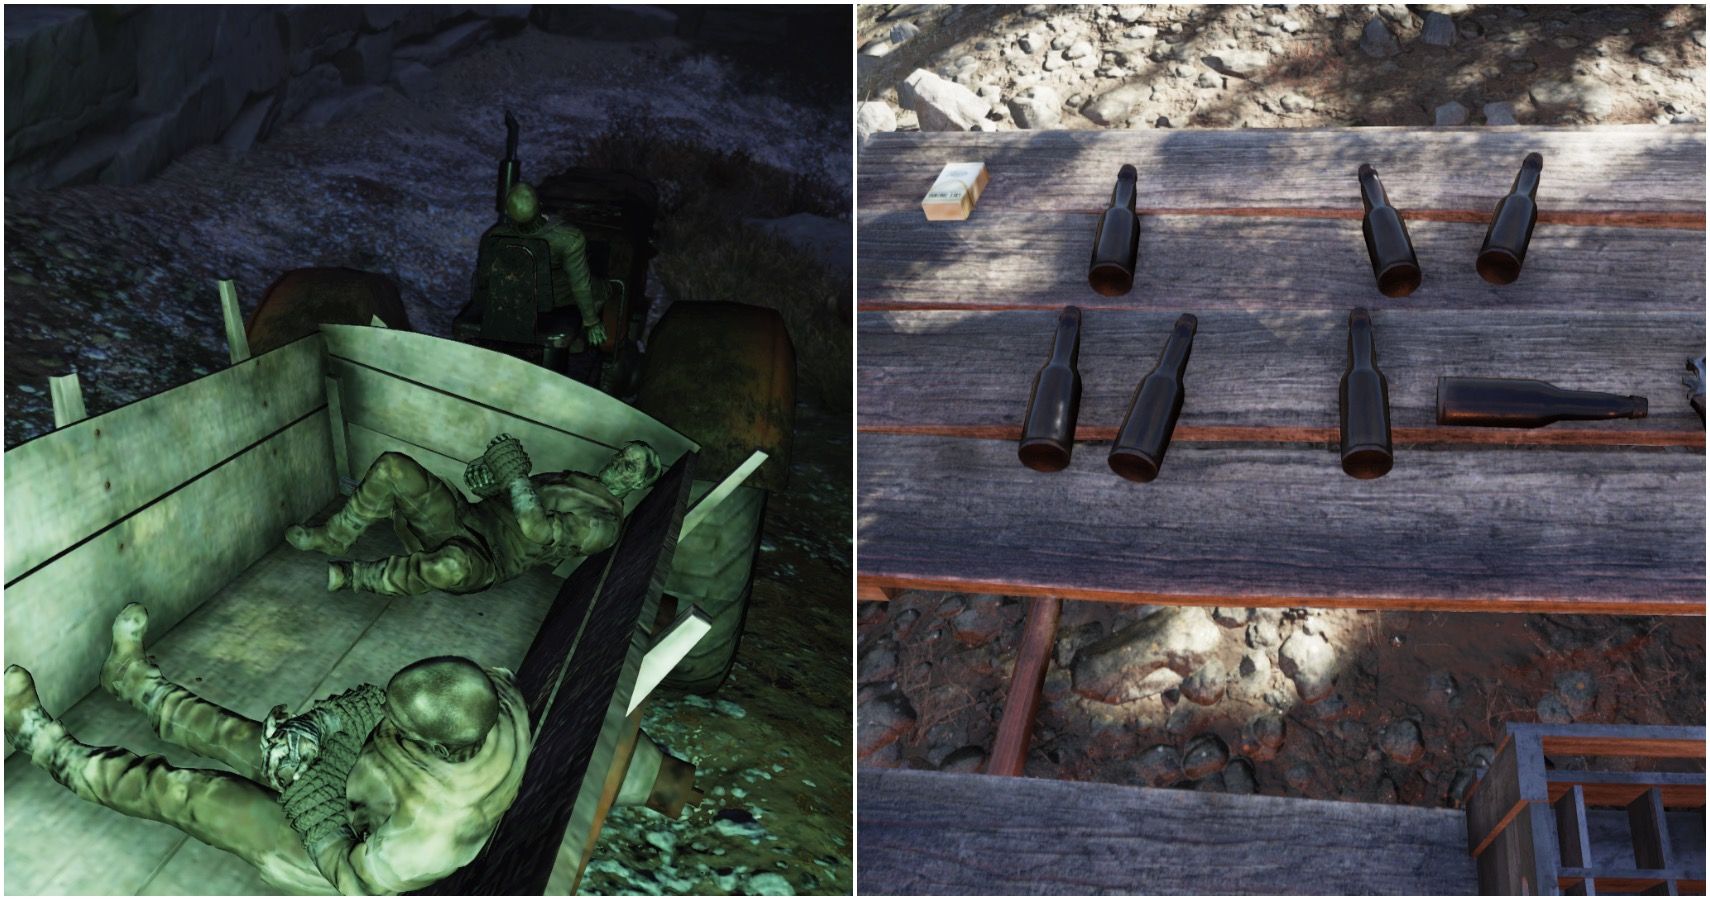 A Skyrim Easter egg and a Loss one